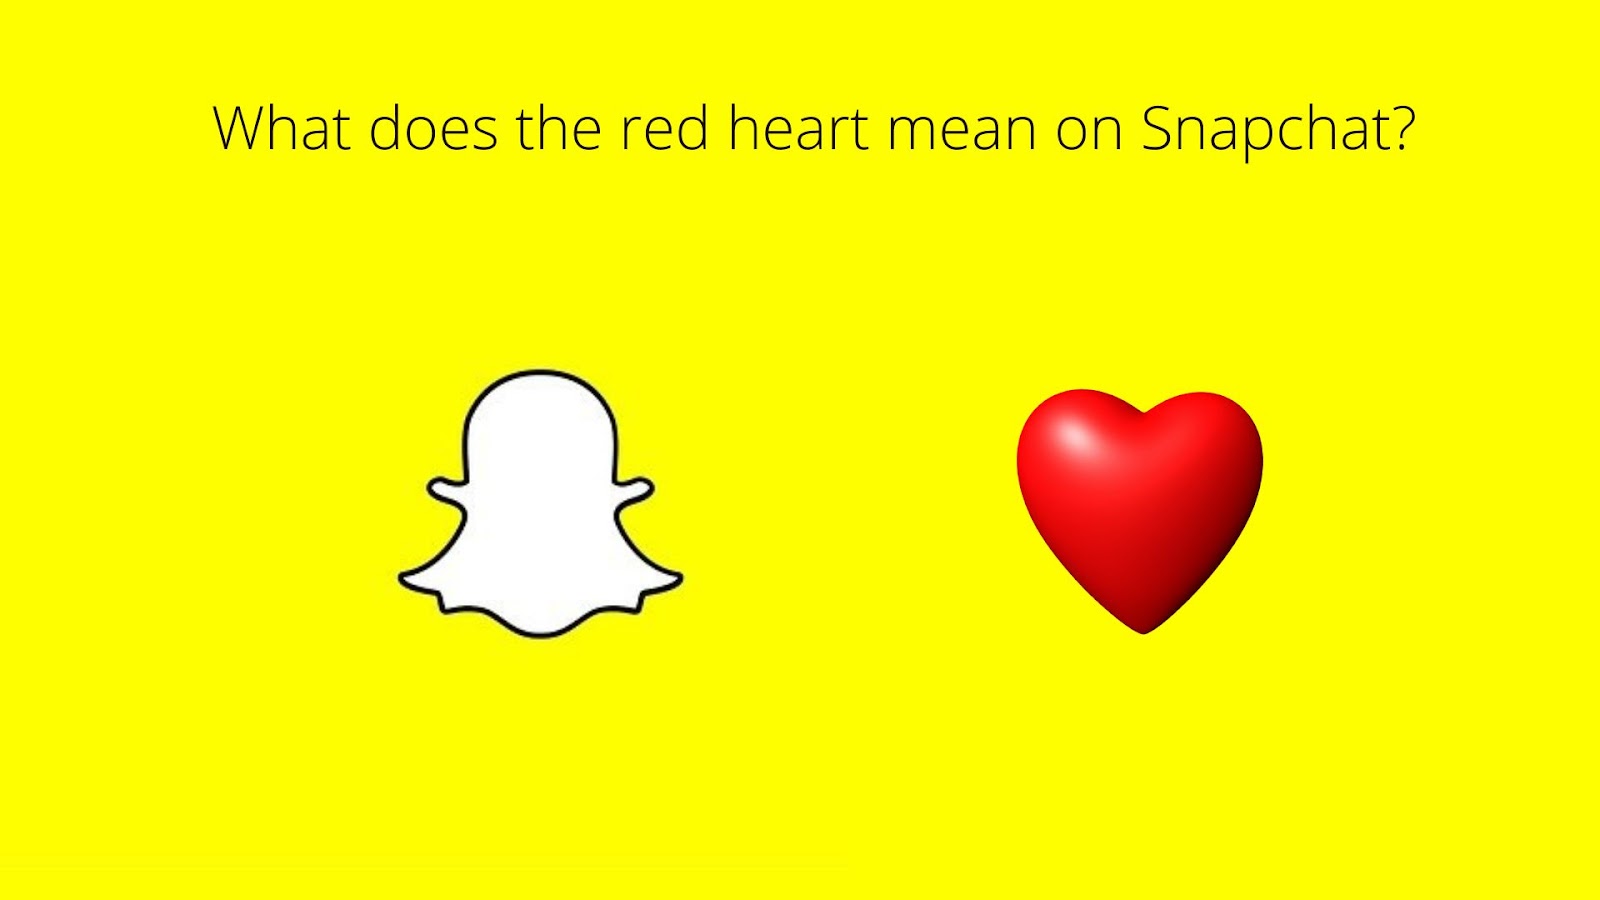 What does the red heart mean on Snapchat?